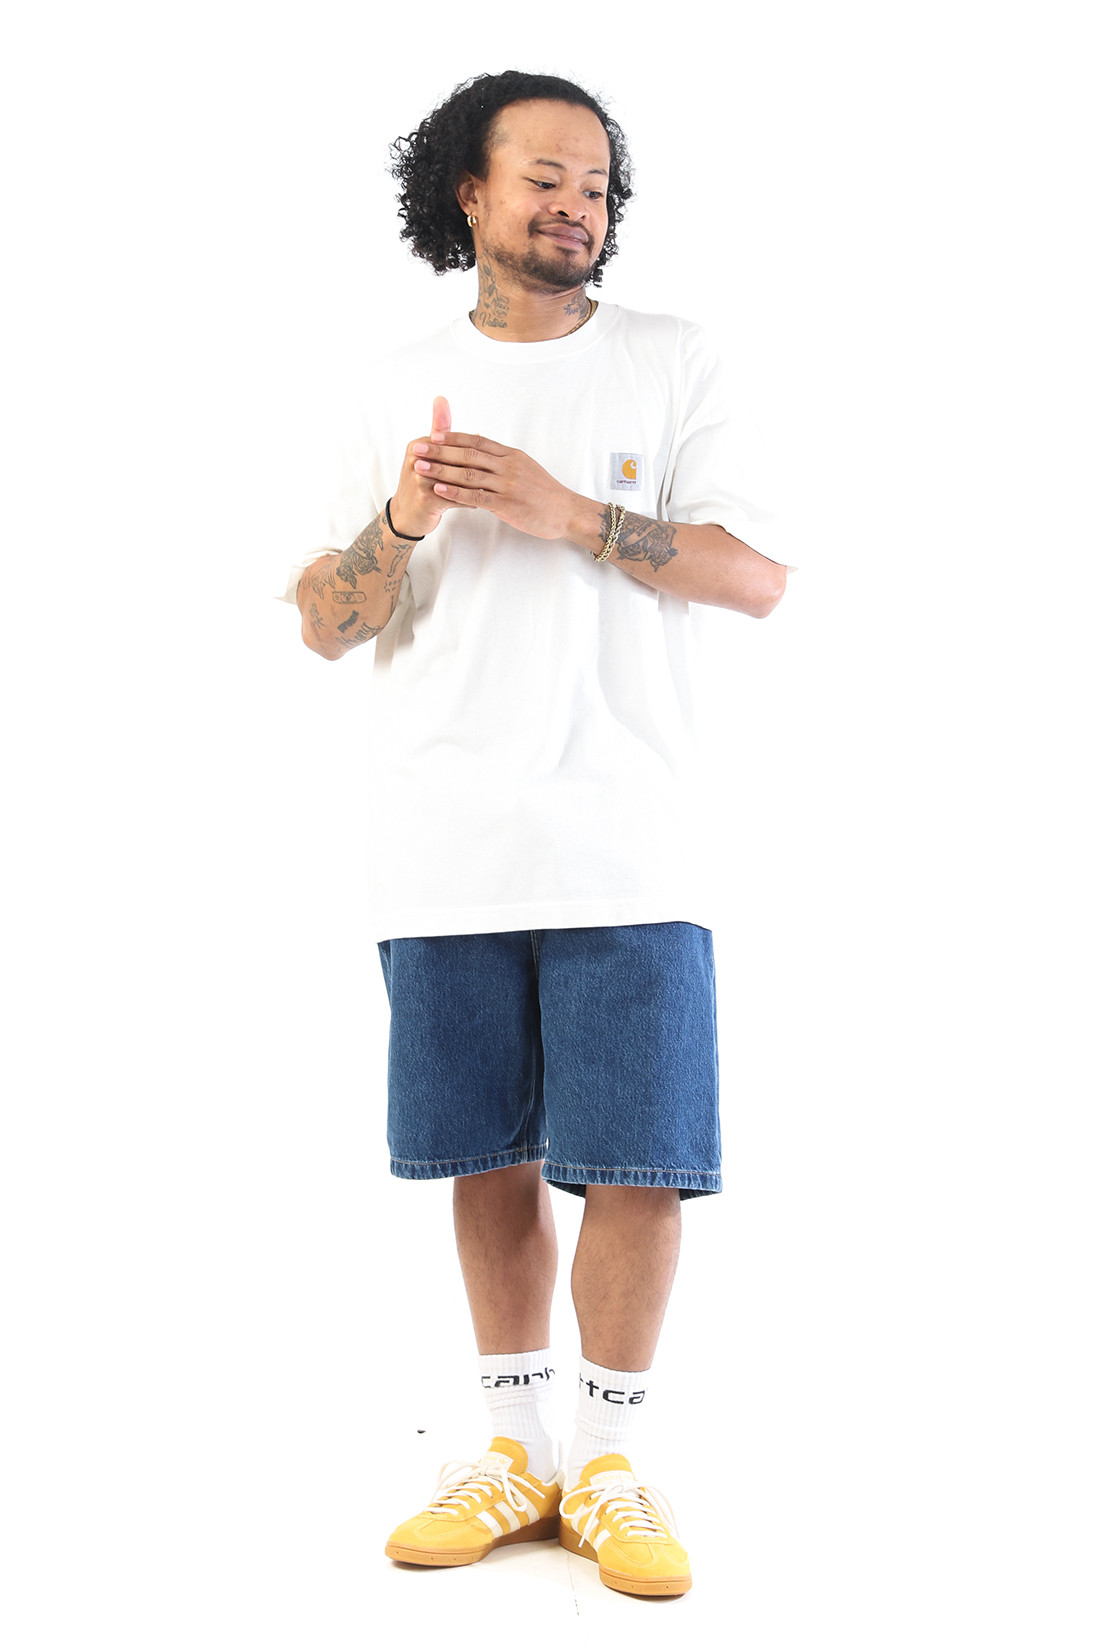 S/s nelson tee garment dyed Wax